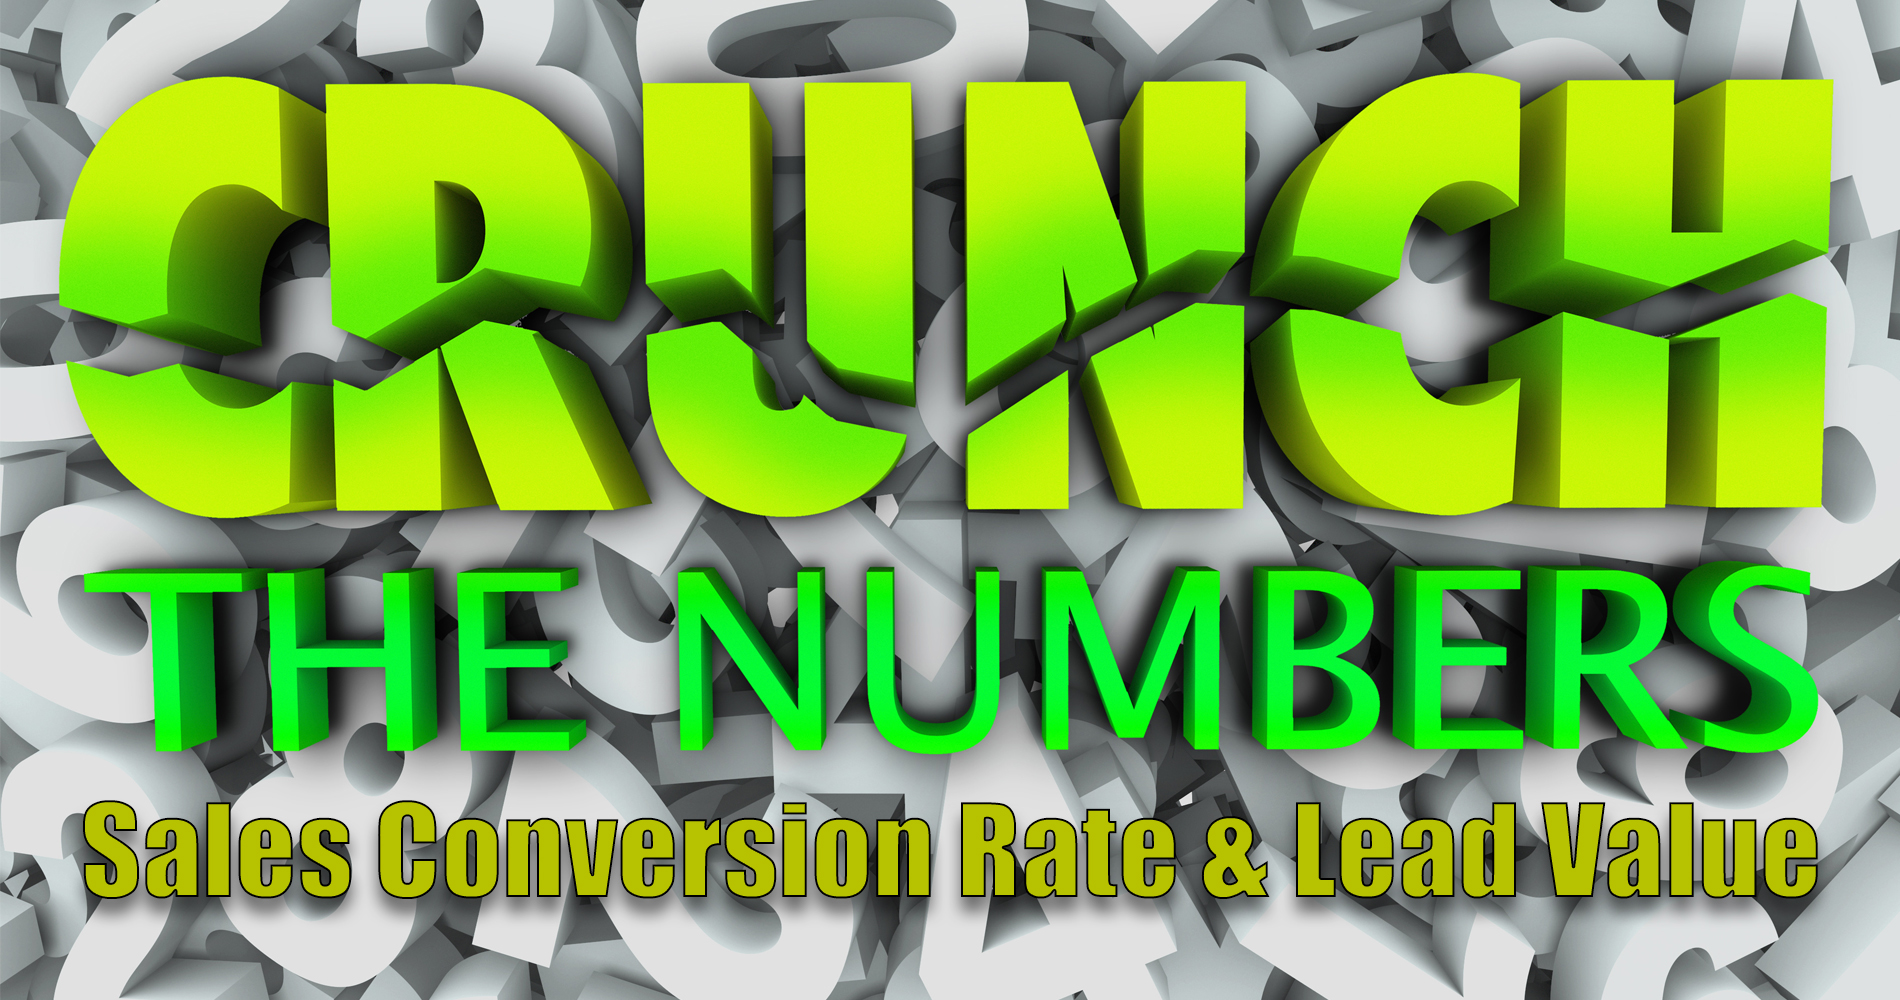 Crunching The Numbers On Sales Conversion Rate & Lead Value